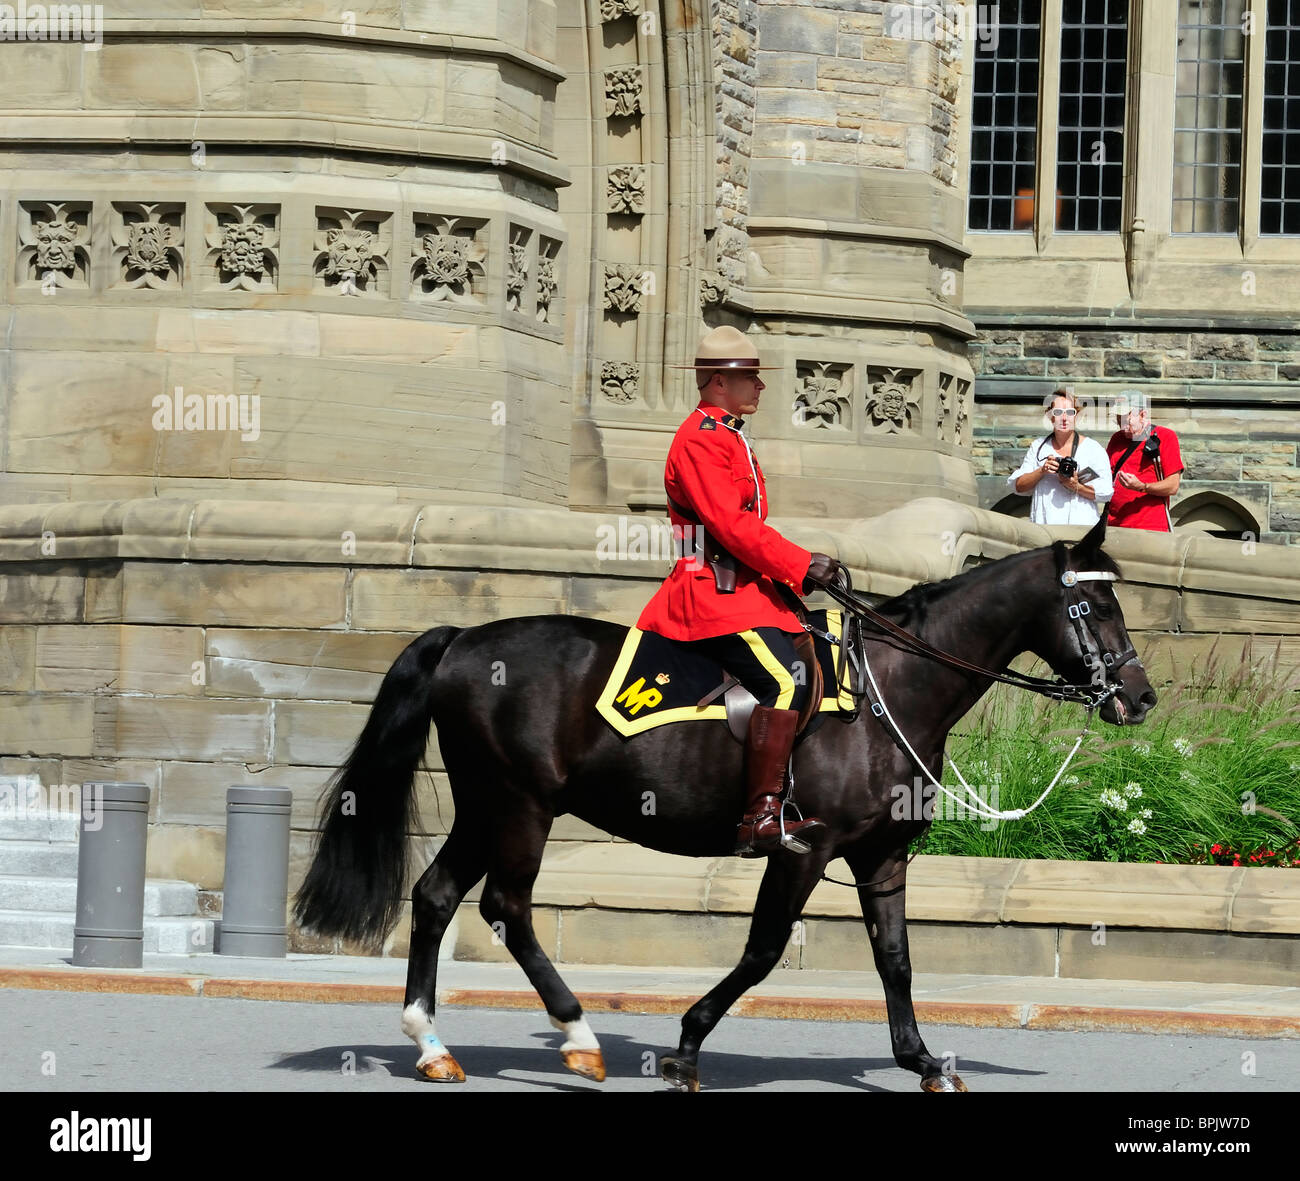 Mountie On Parliament Hill Ottawa Canada To Meet Tourists And Visitors To The Canadain Parliament Buildings Stock Photo